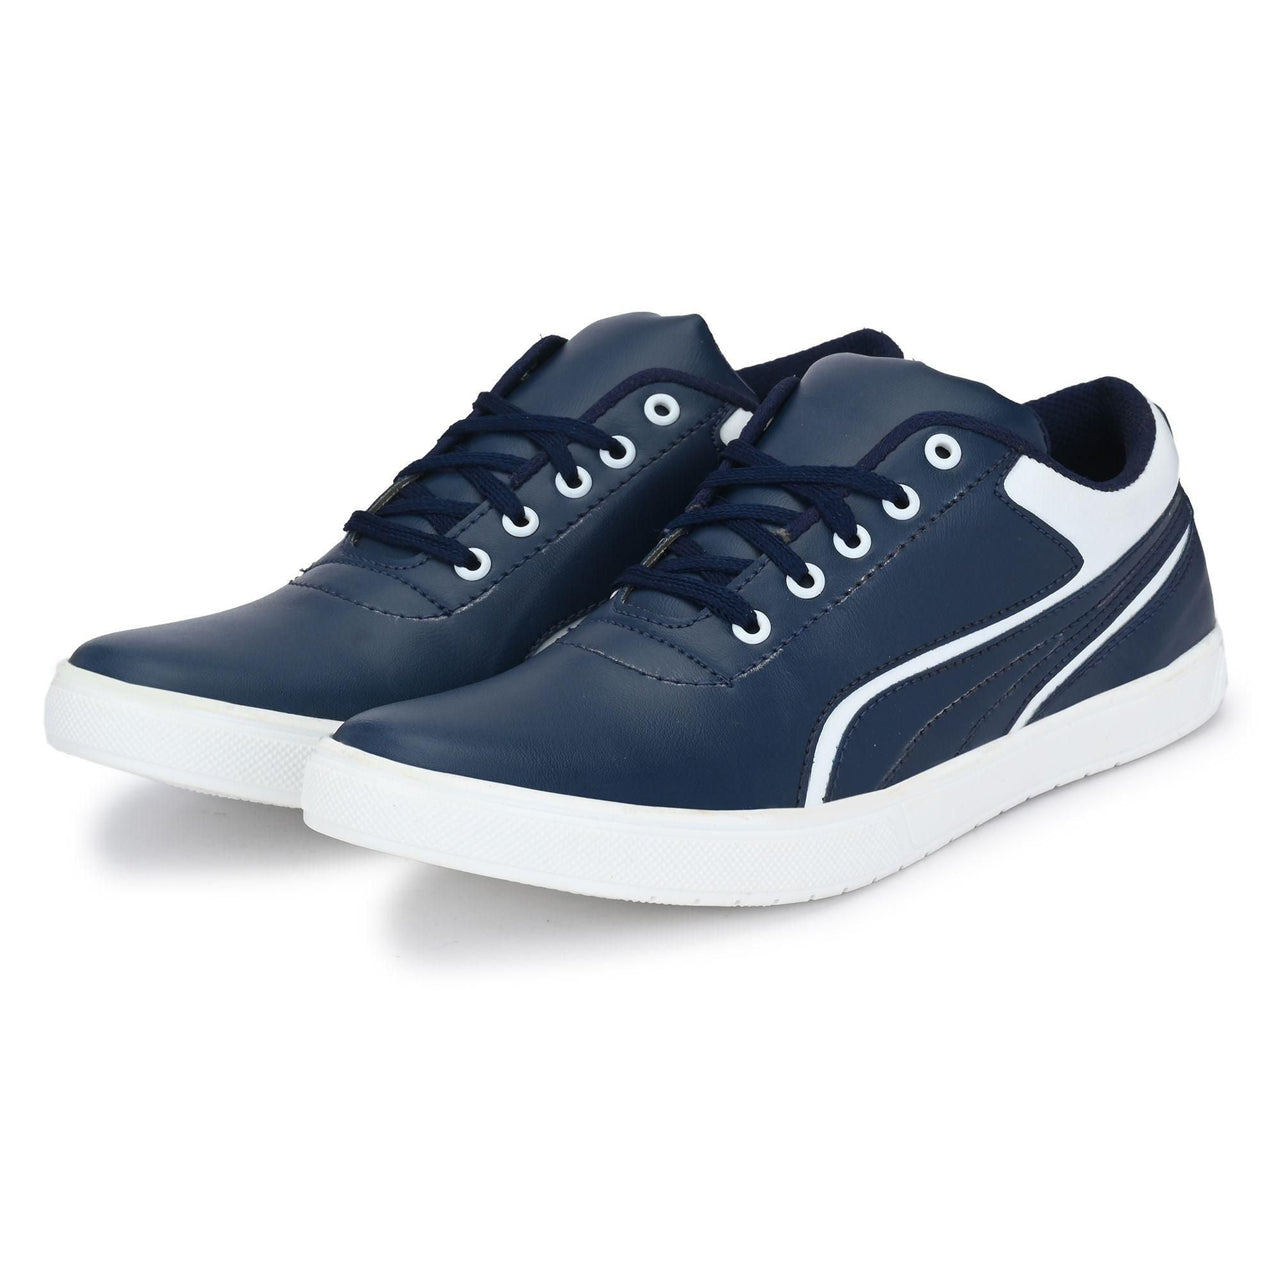 Groofer Stylish Casual Shoes For Men's Shoes